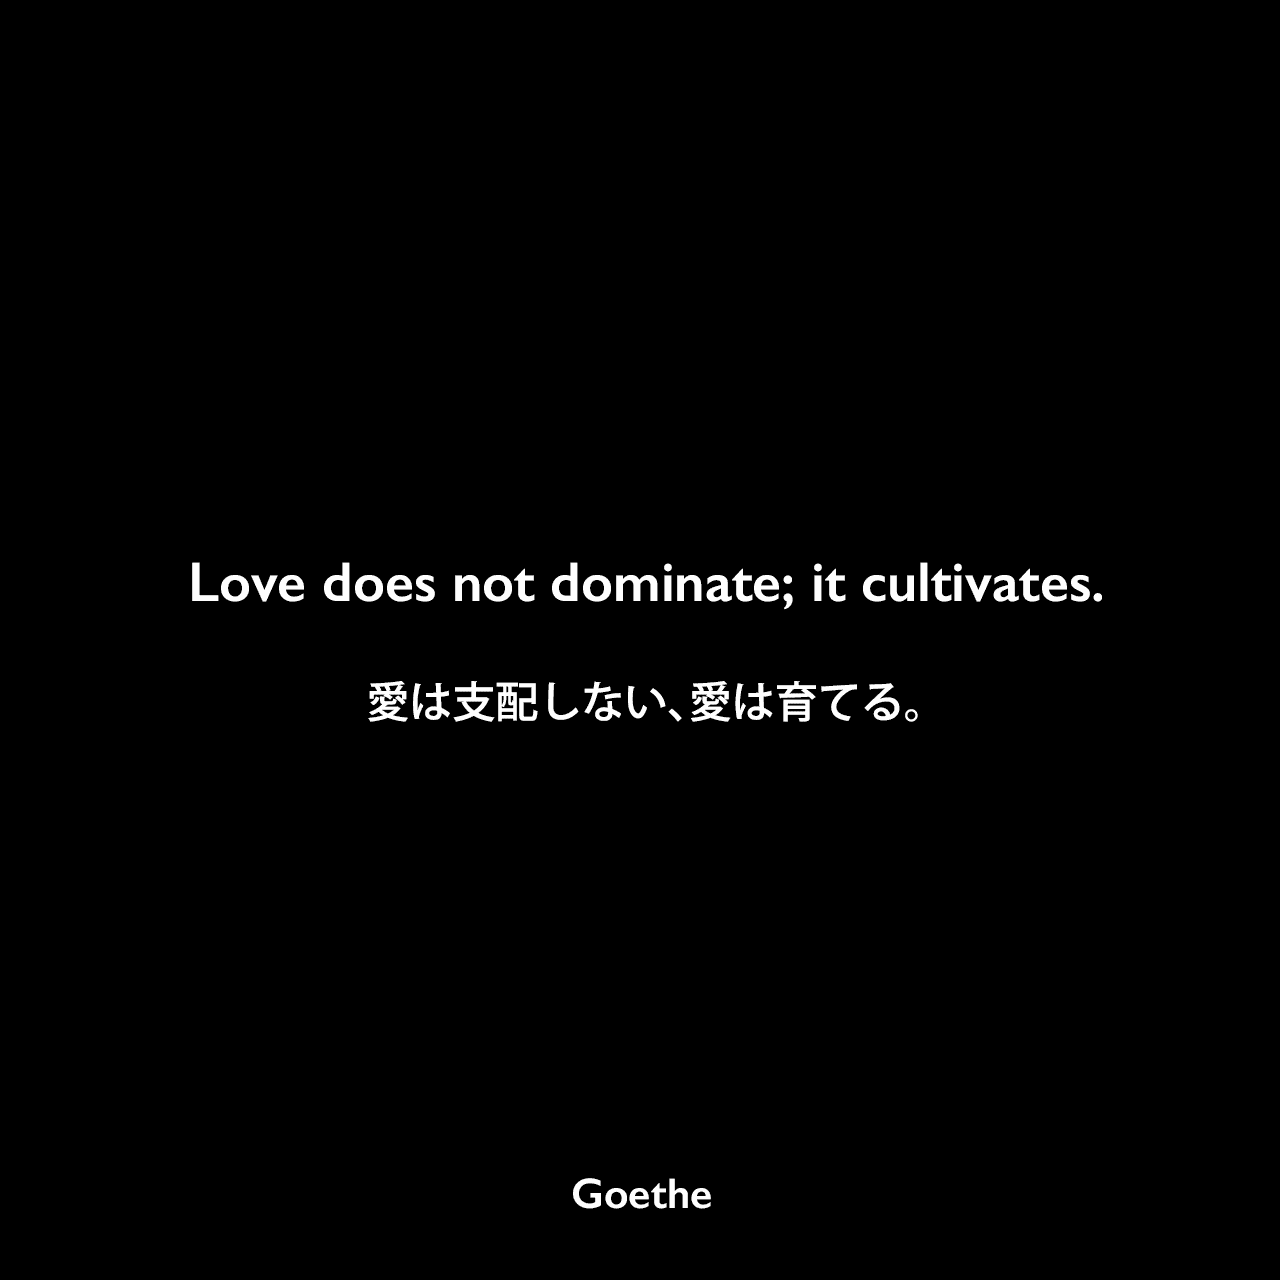 Love does not dominate; it cultivates.愛は支配しない、愛は育てる。